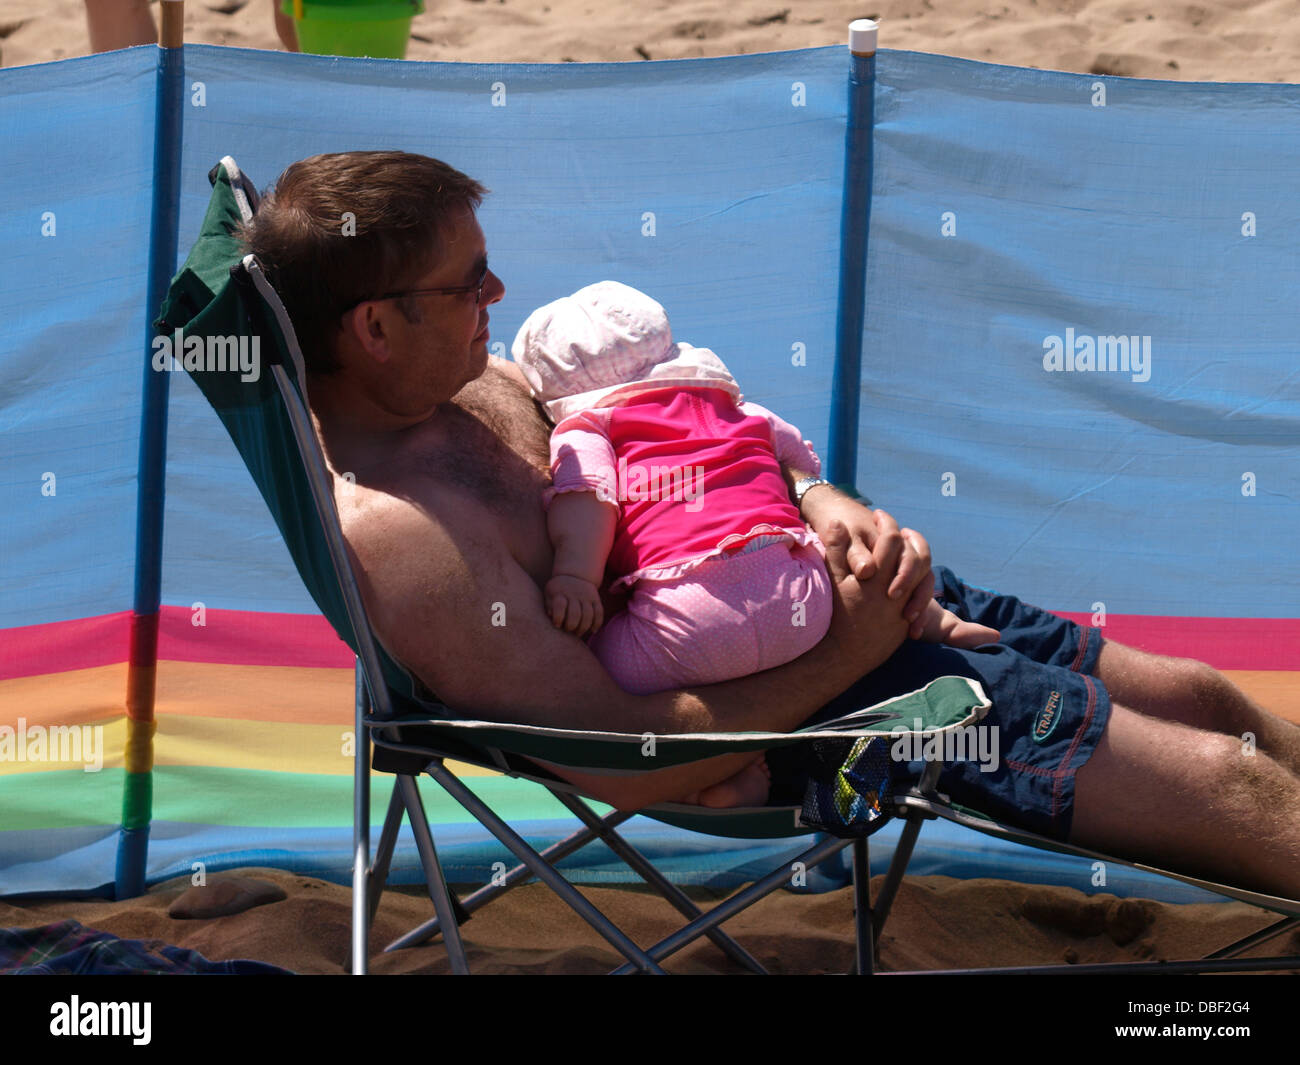 Man with cute baby asleep in his arms at the beach, UK 2013 Stock Photo